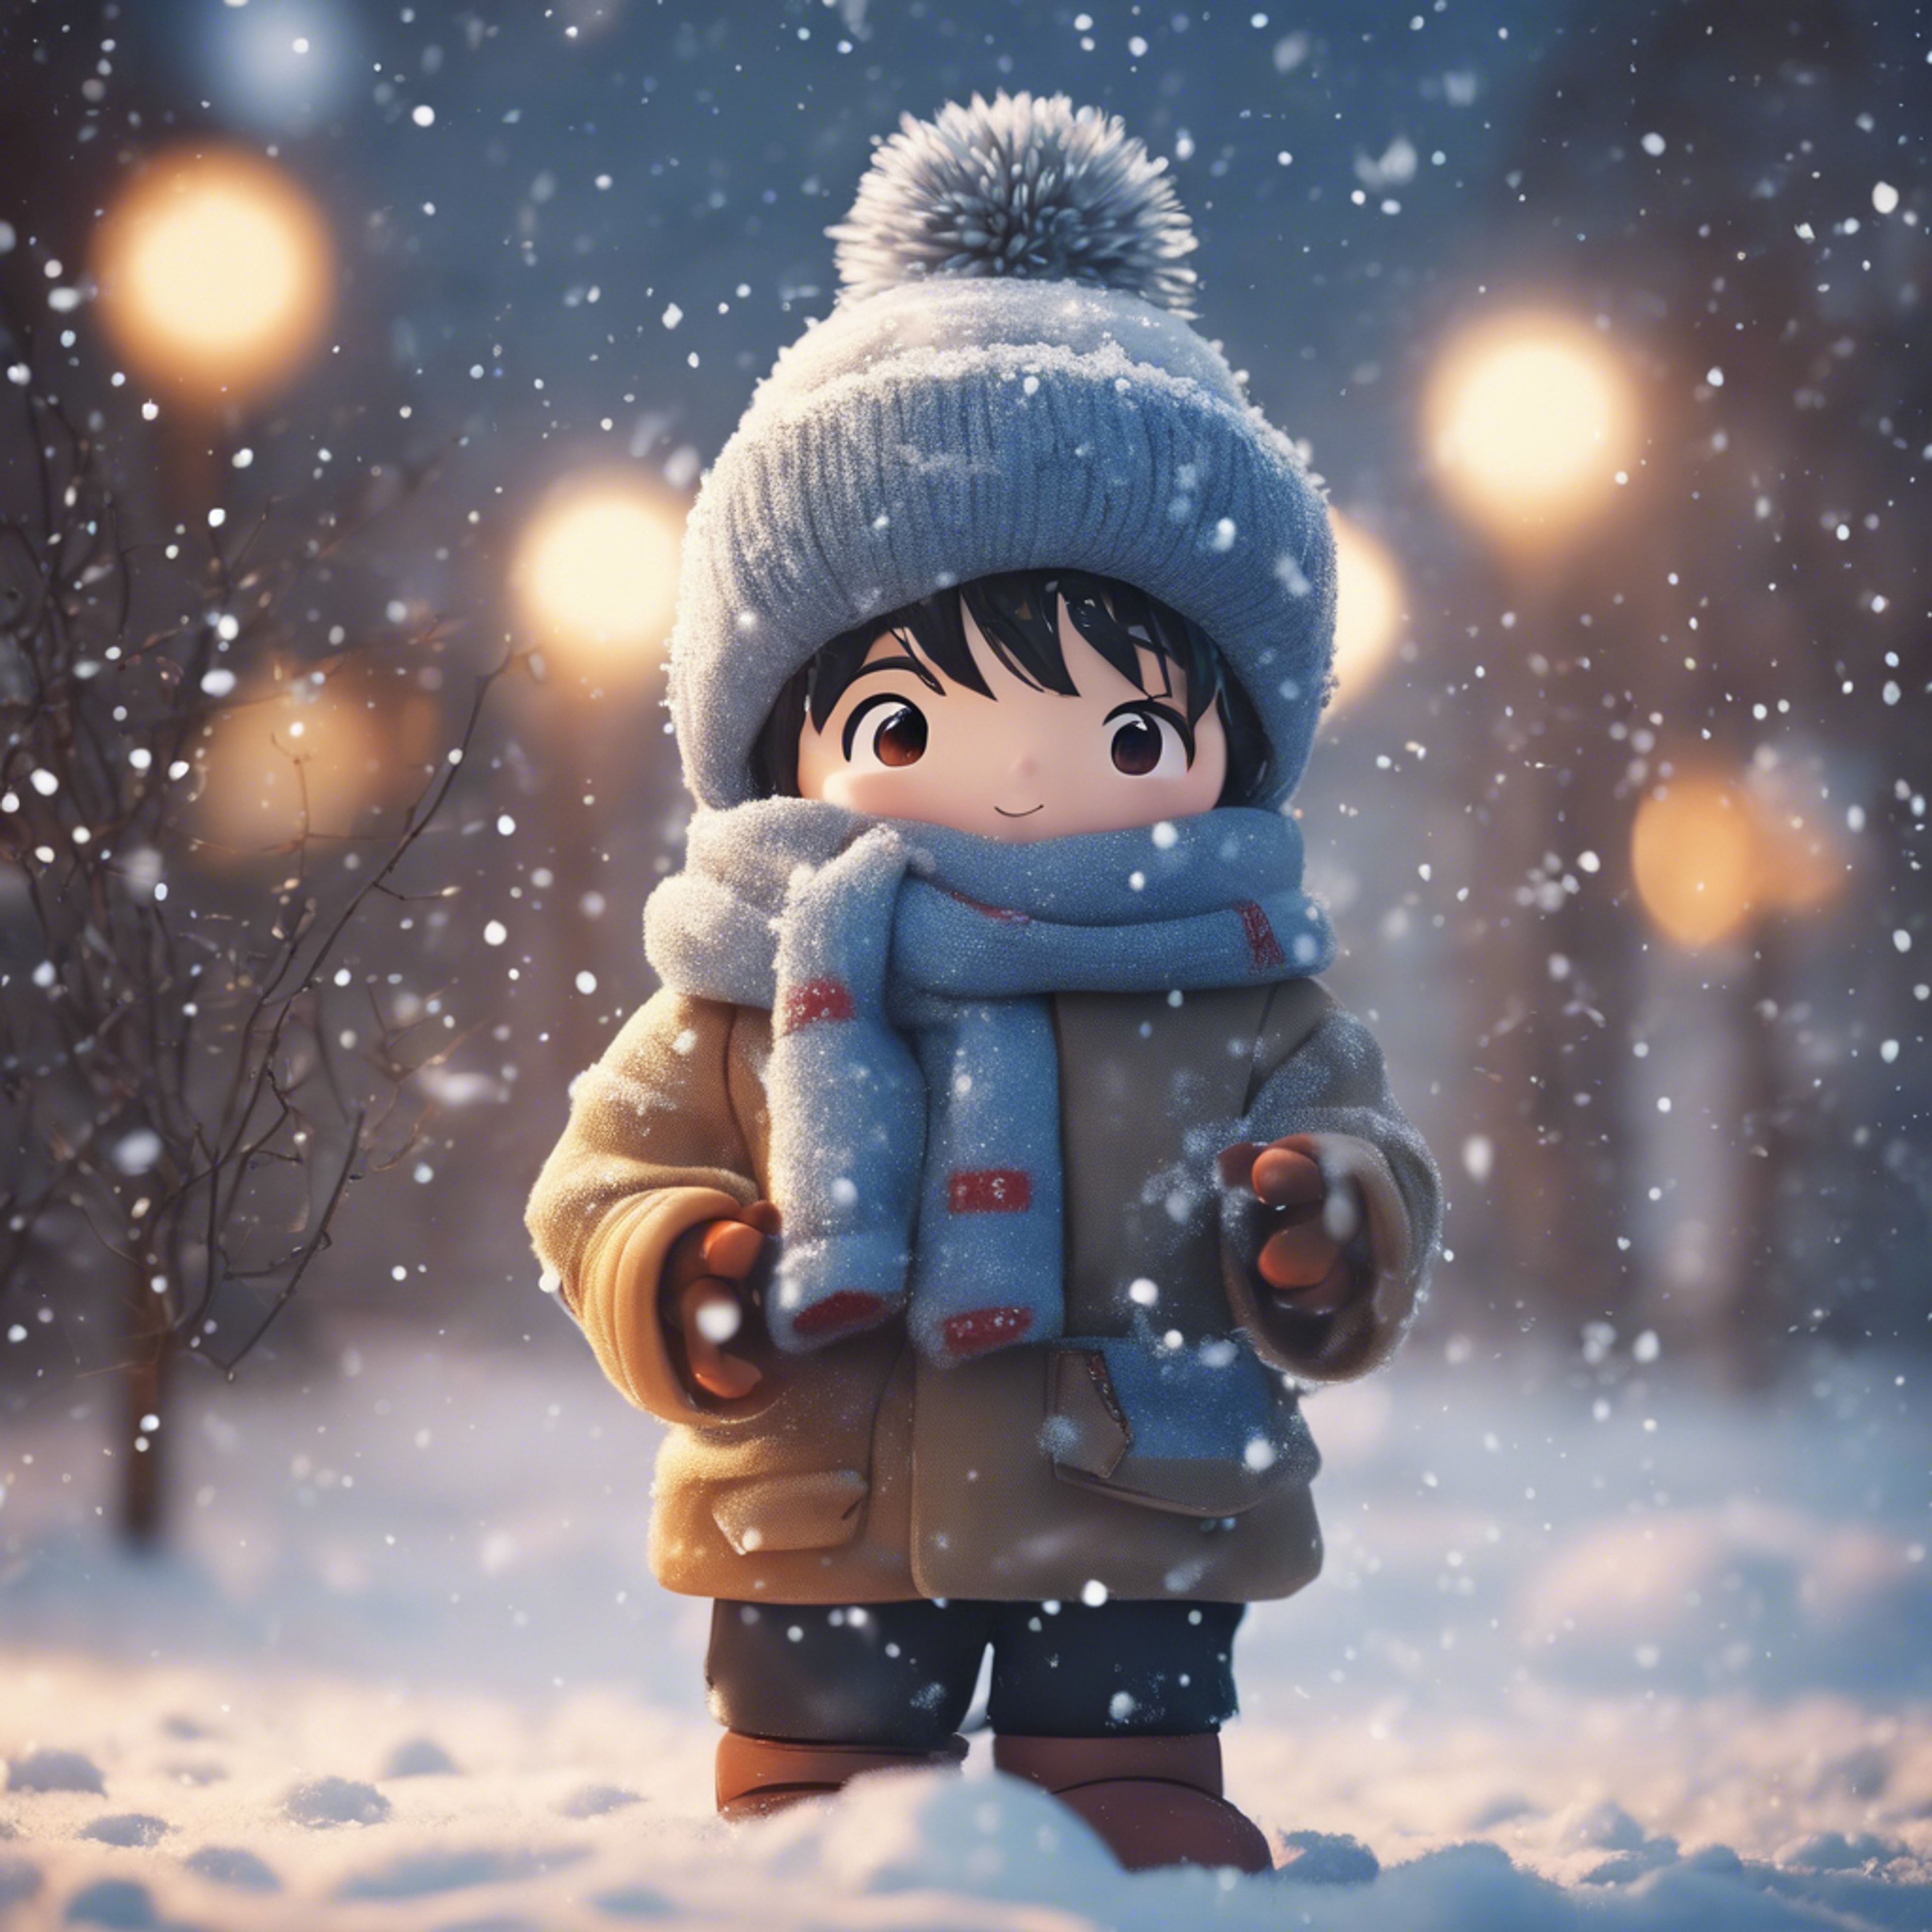 Anime boy wrapped in warm winter clothes, building a playful snowman in the snowfall. Tapeta[d4075dc9b13644f685e7]